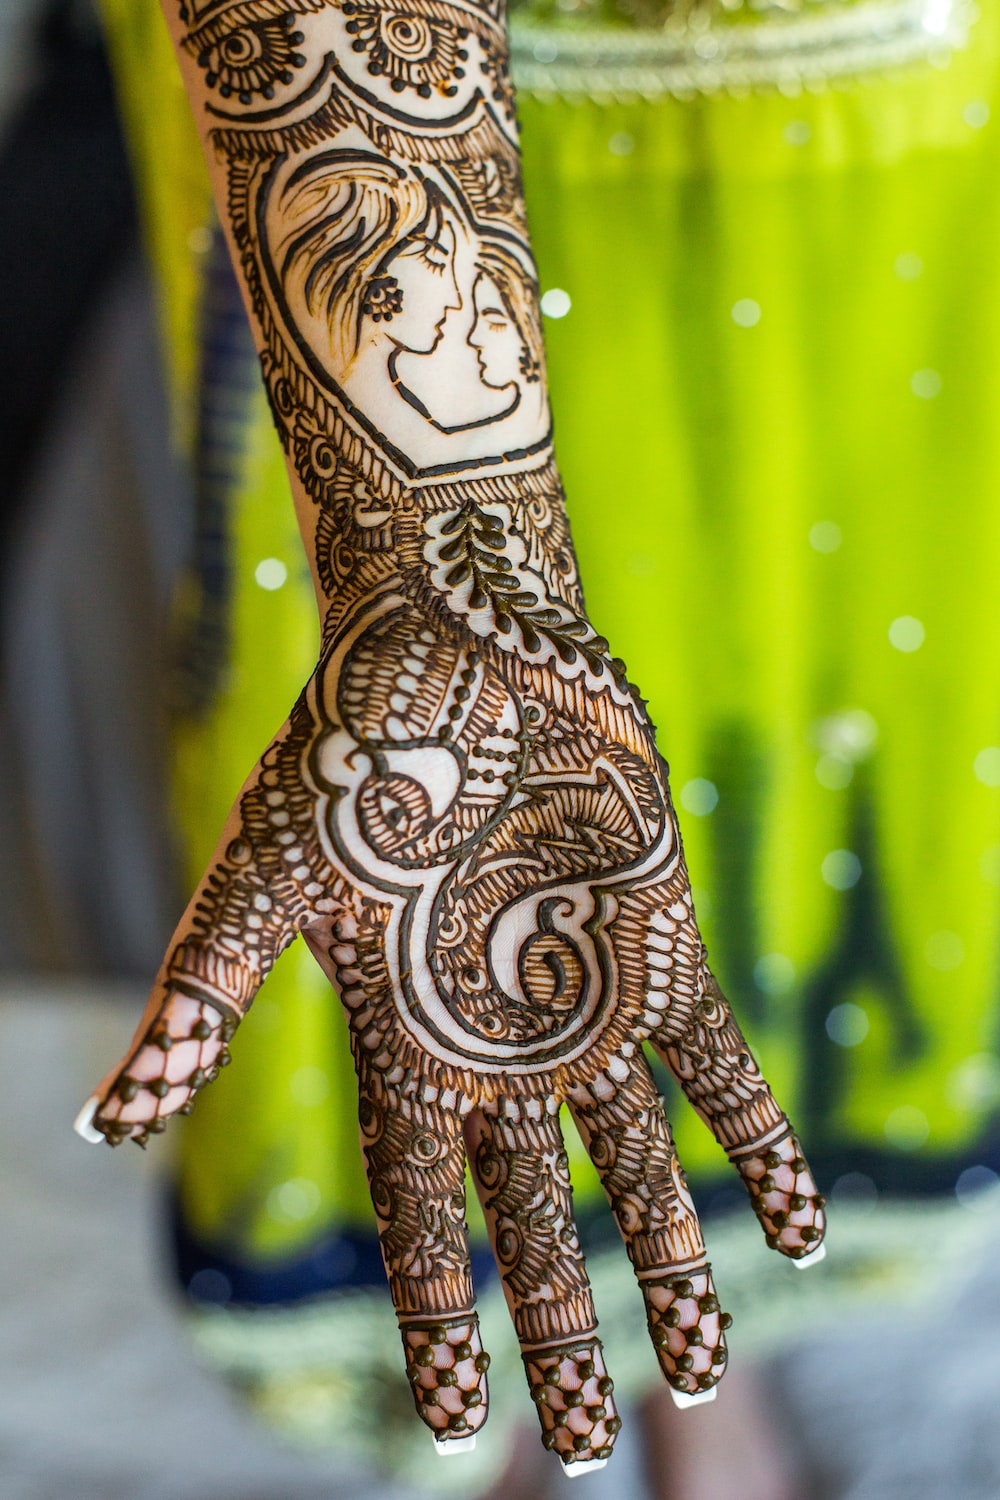 Henna pictures hd download free images on